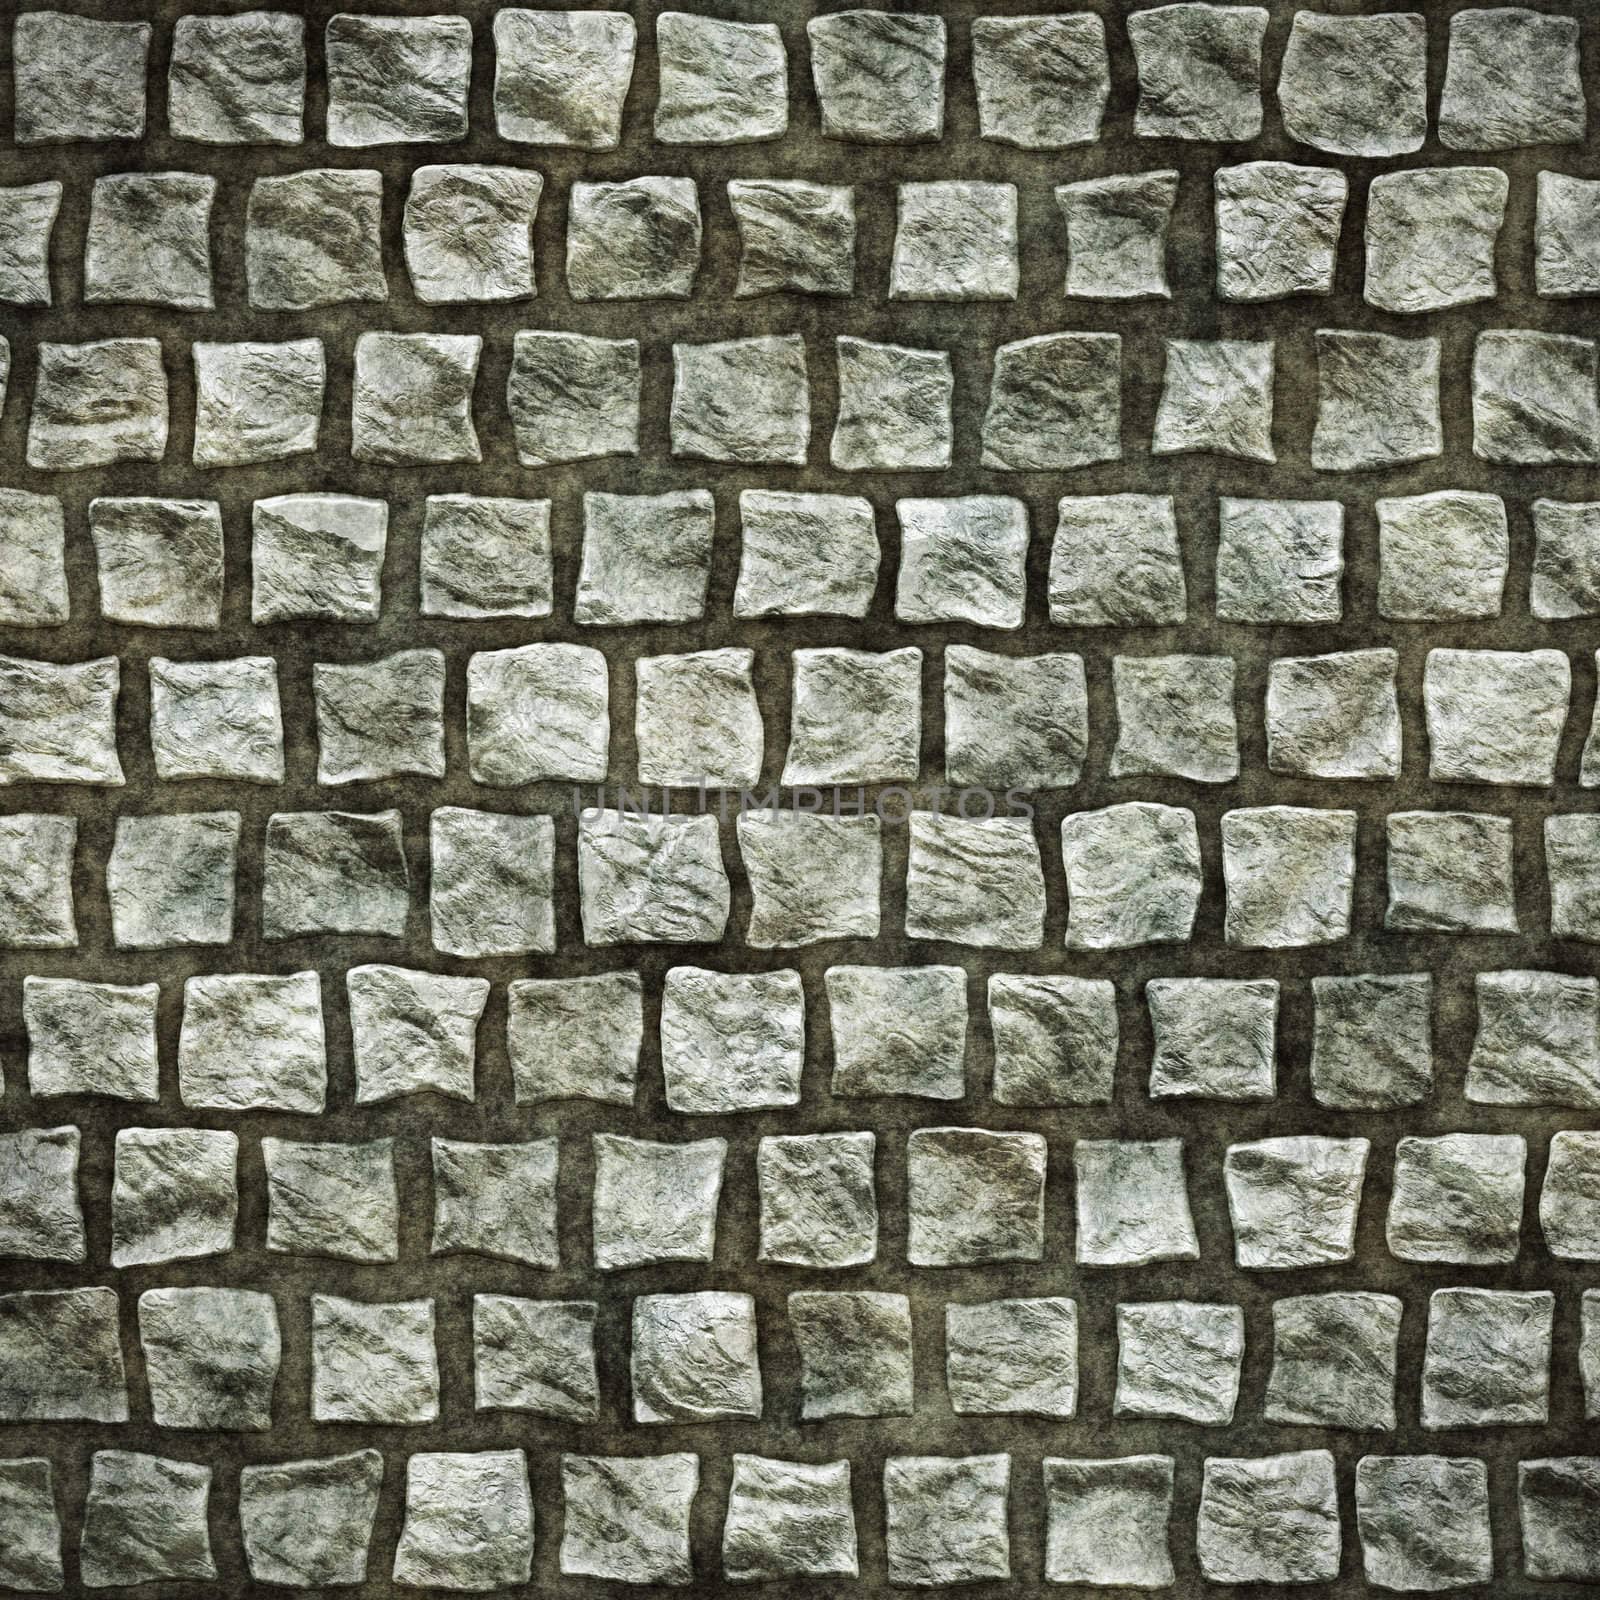 excellent image of a grunge stone wall